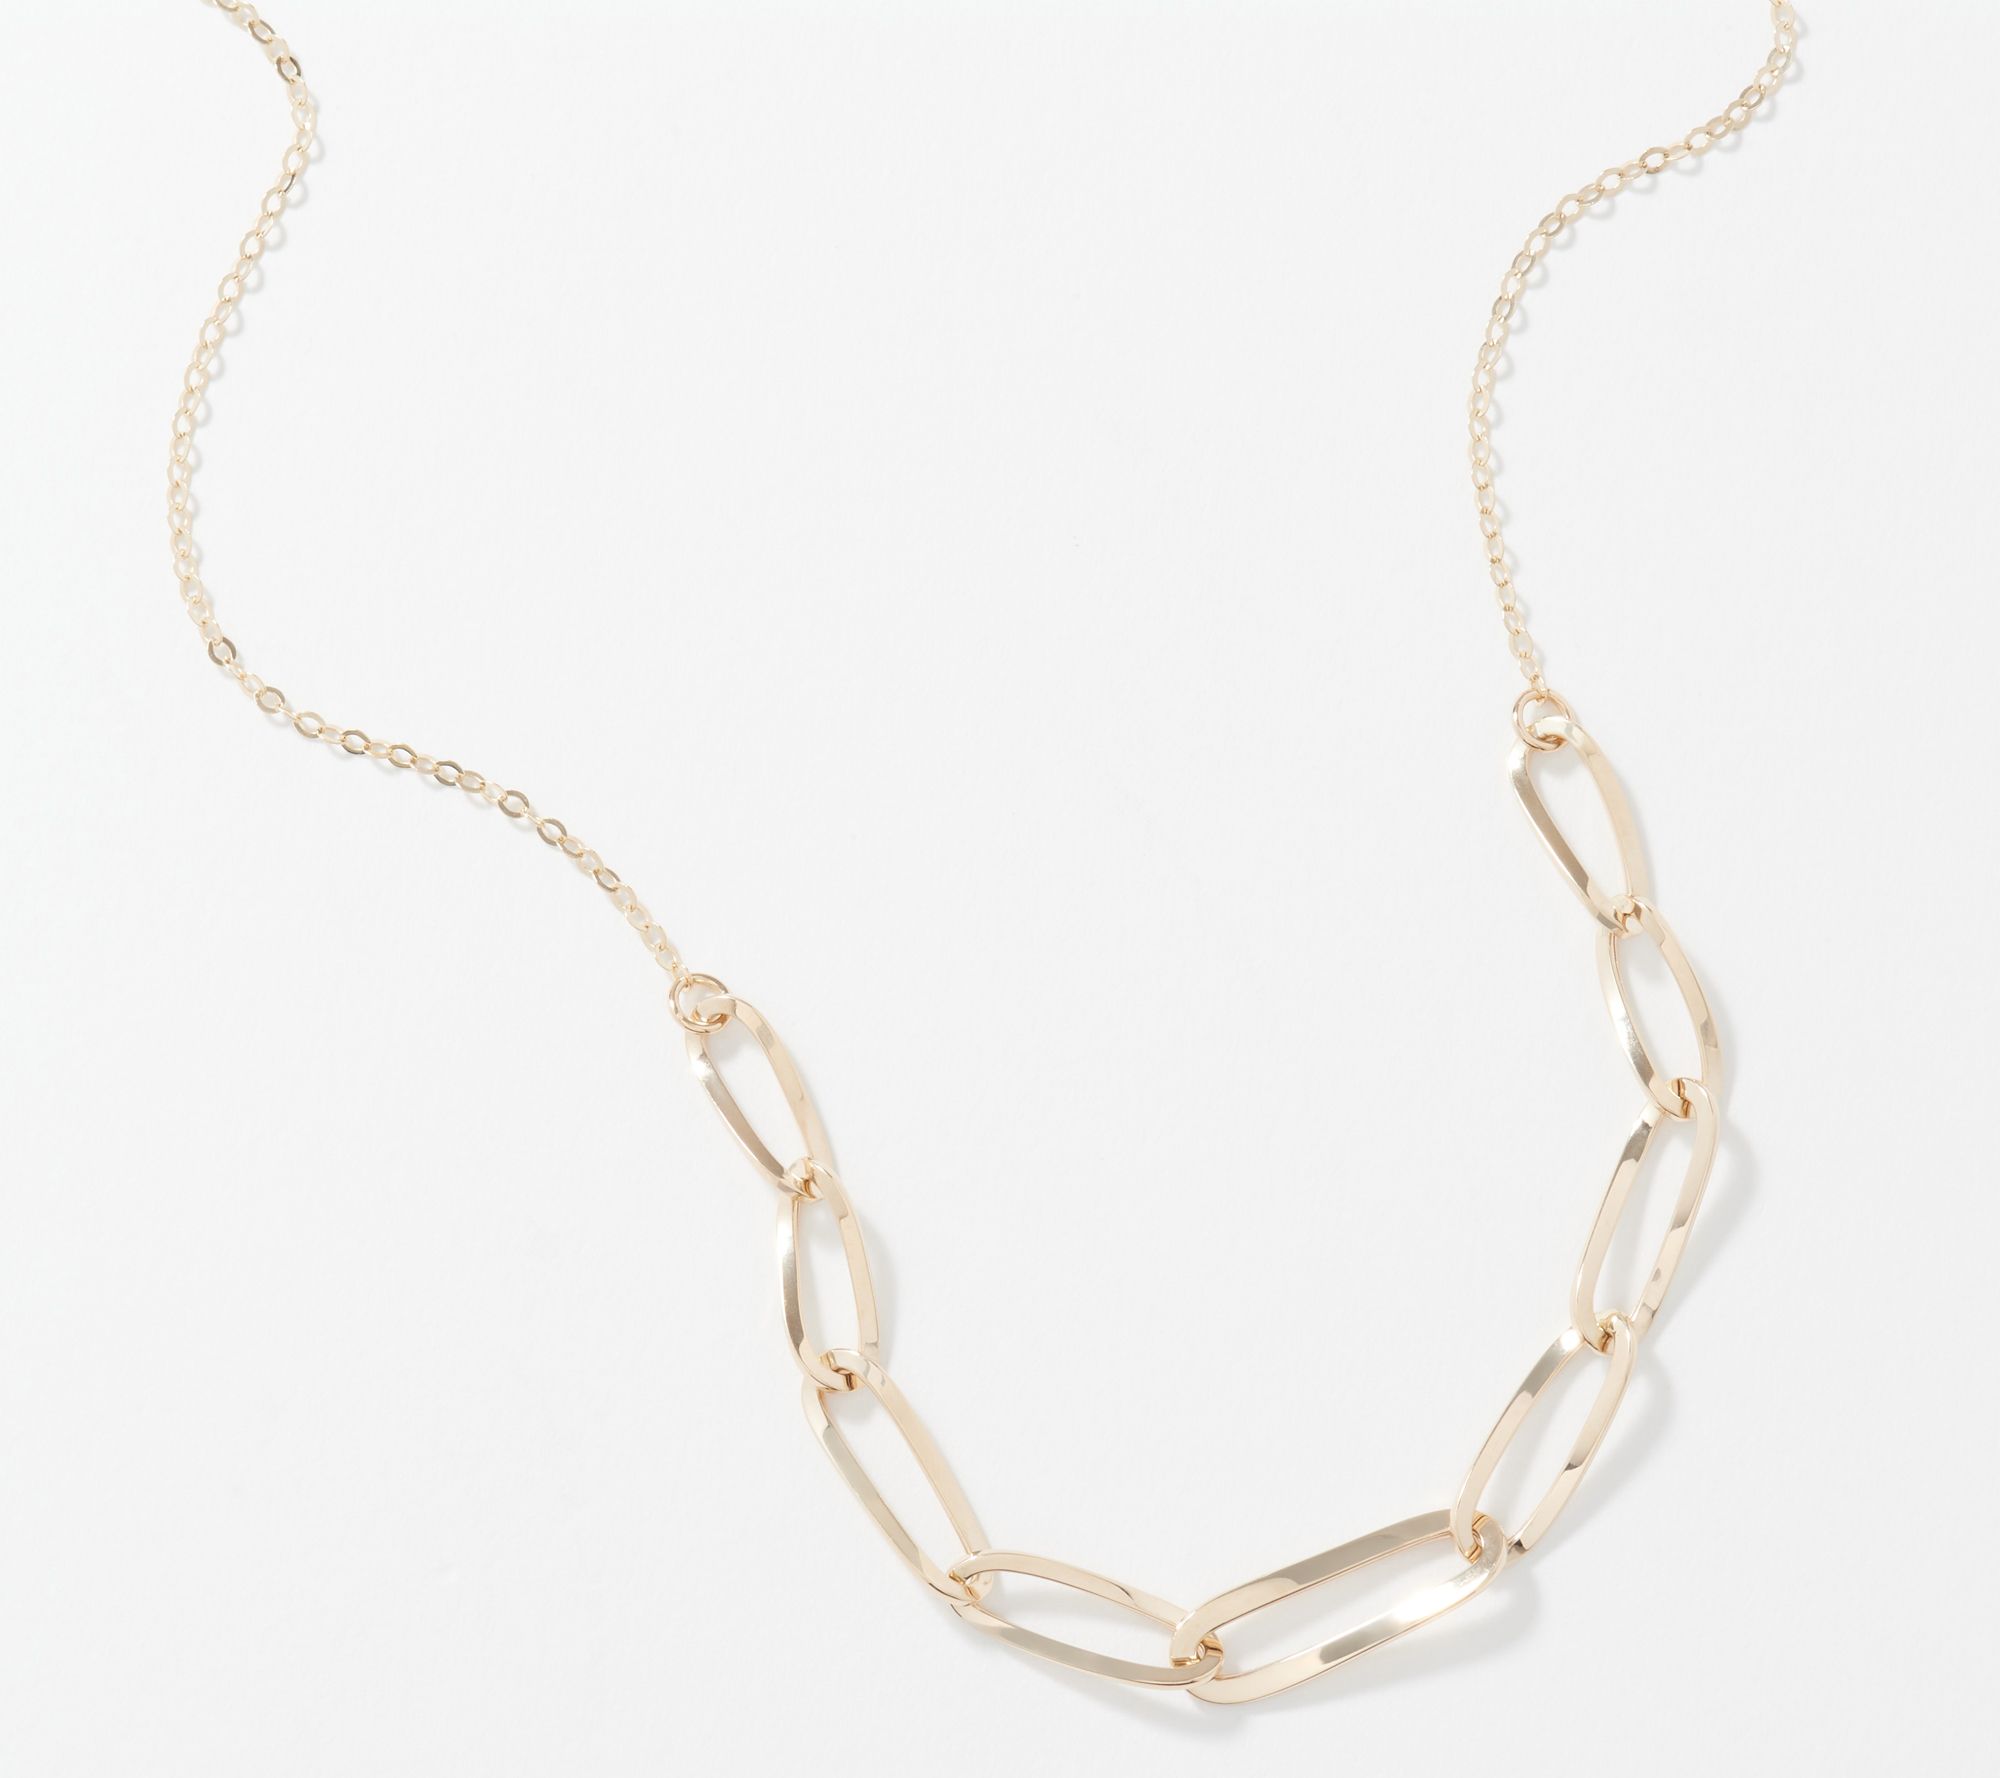 Adorna 14K Gold Twisted Paperclip Necklace, 3.56g - QVC.com